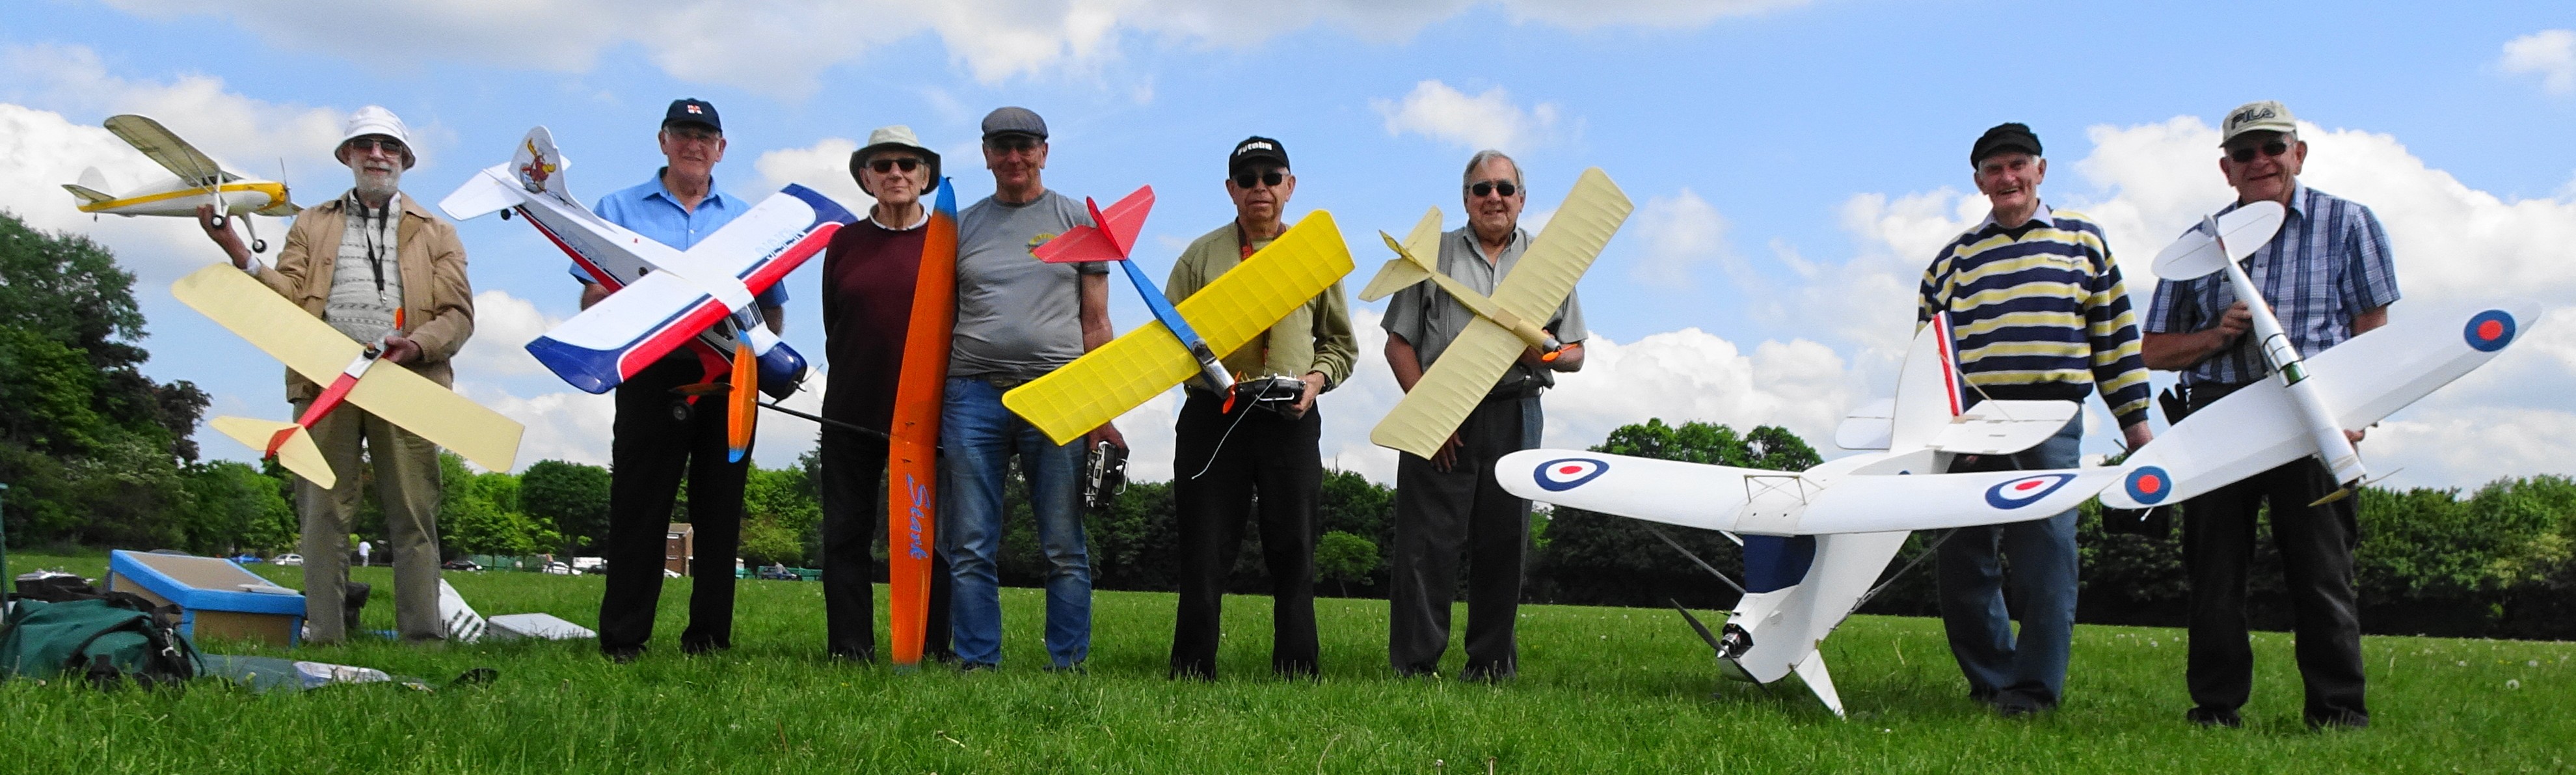 Members of the club at the flying site